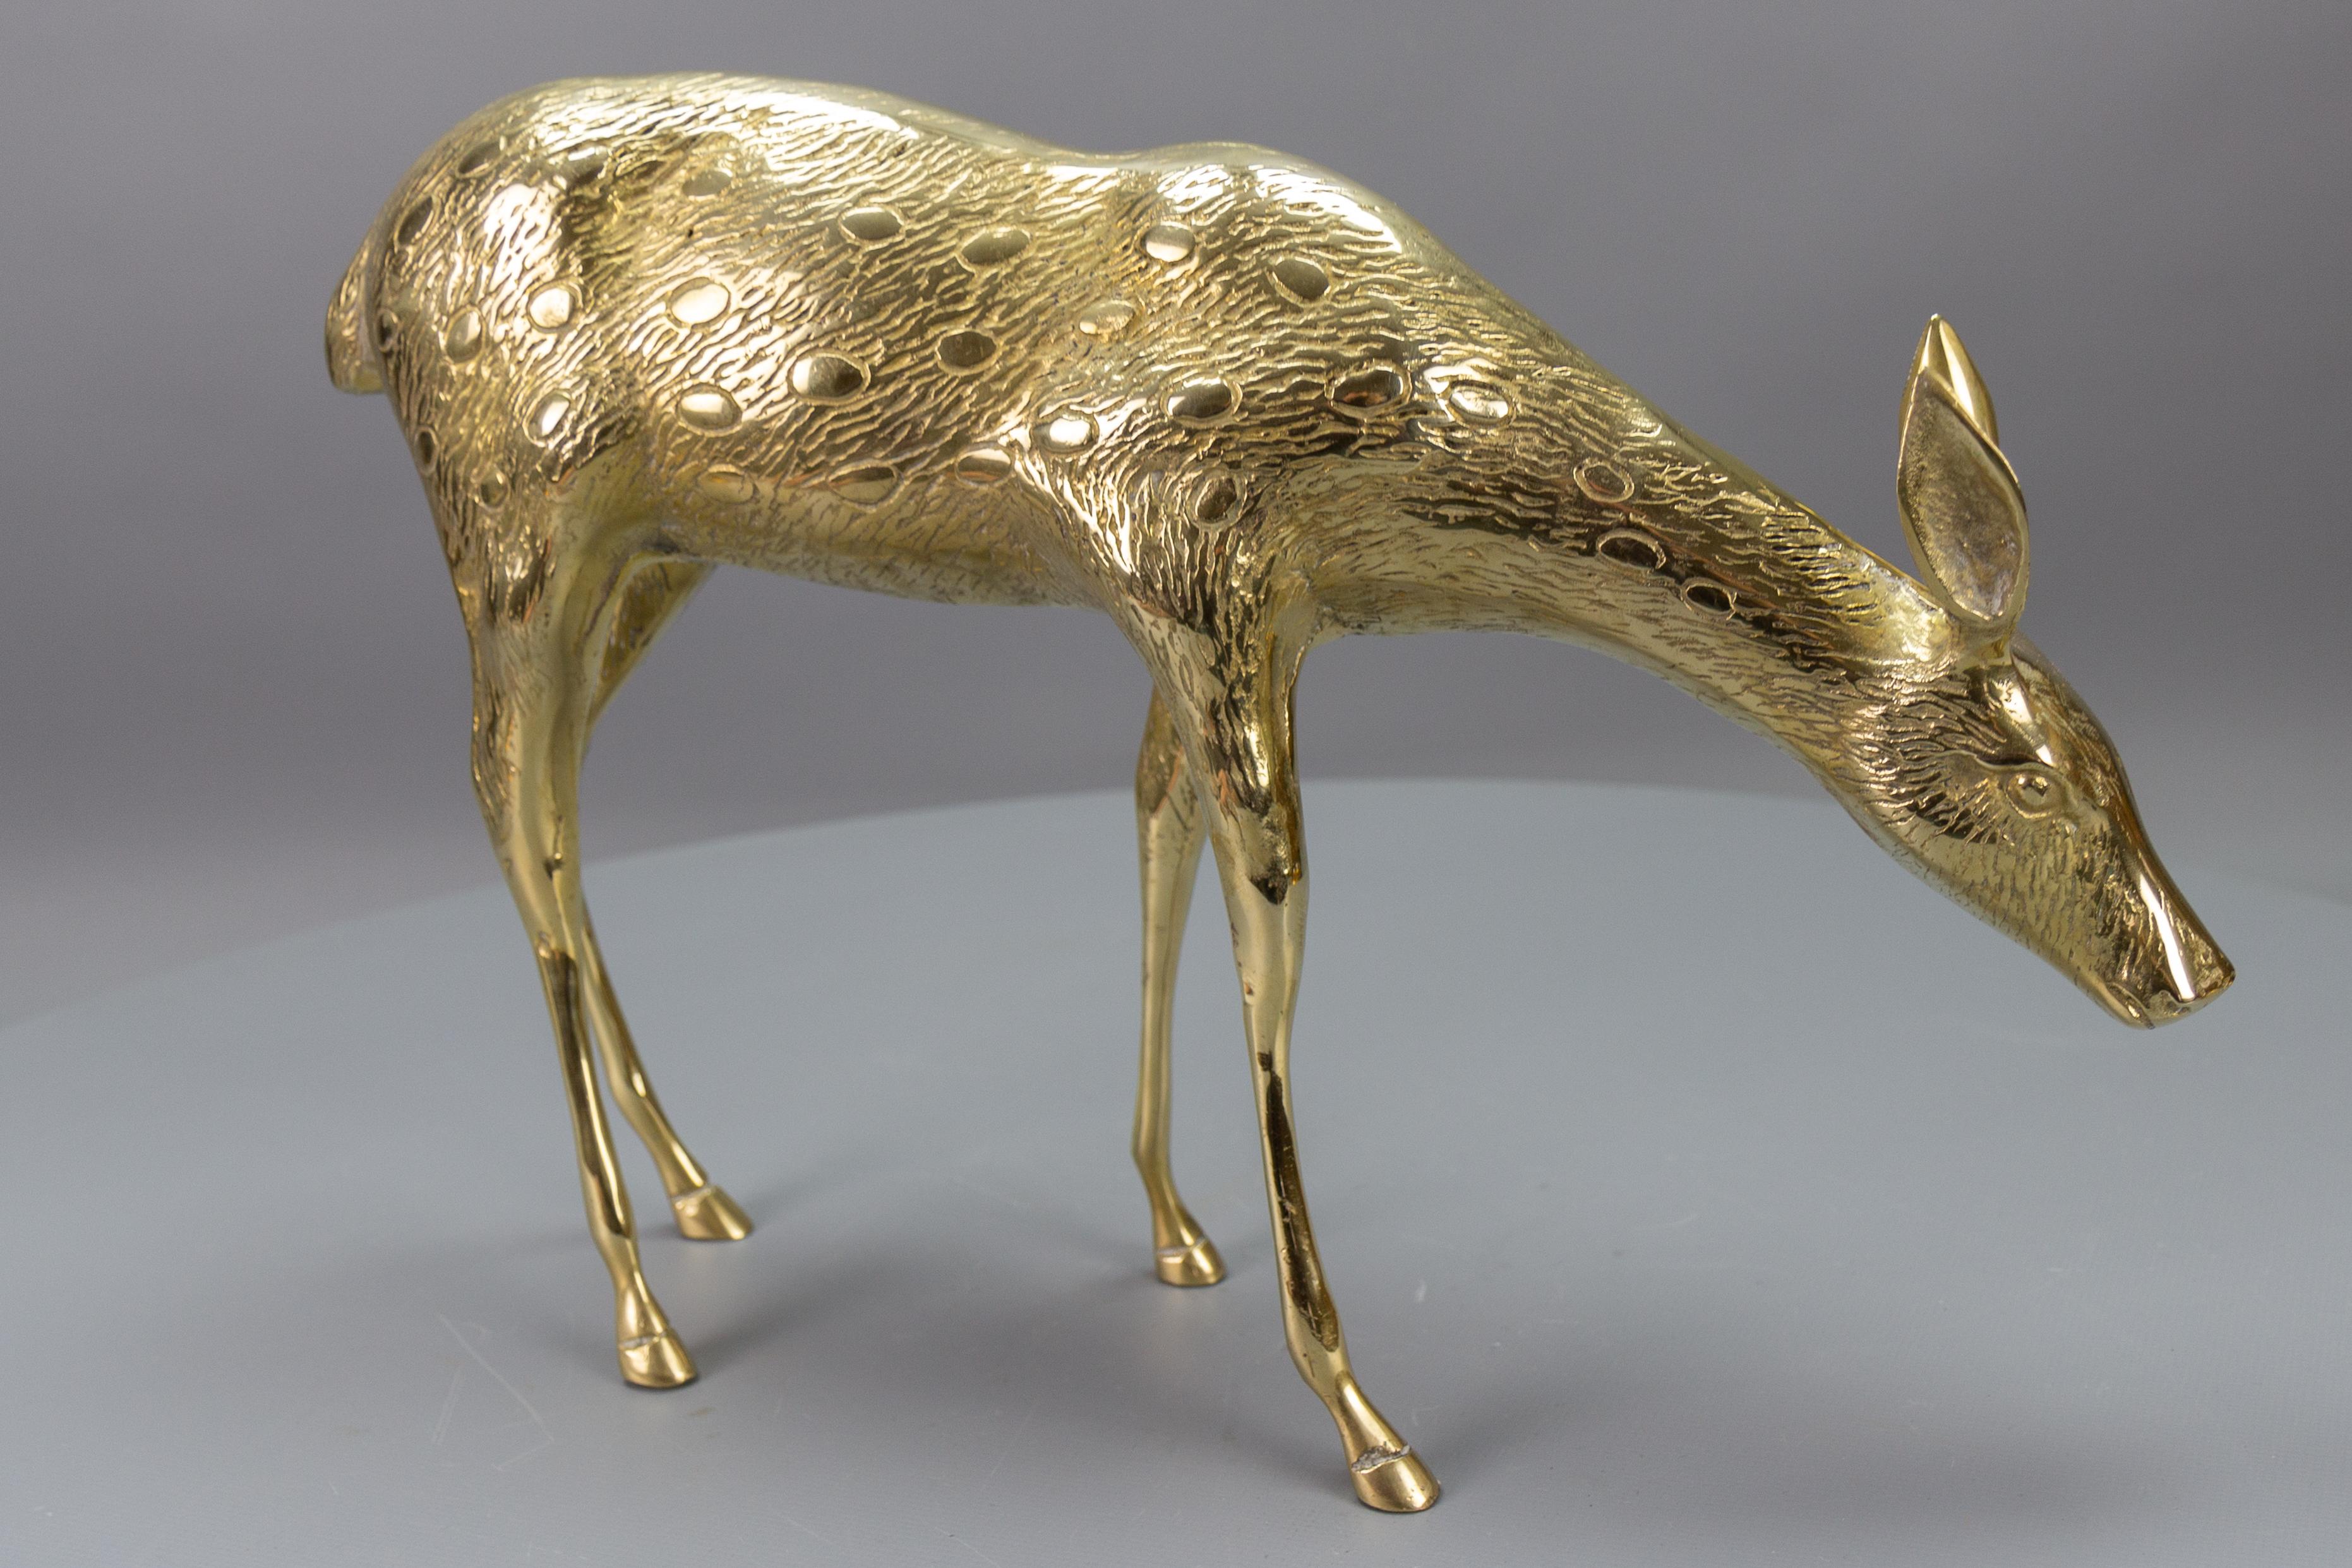 Standing doe deer sculpture made of solid brass, from the circa 1970s.
Adorable and decorative piece - a brass sculpture of a standing doe.
Dimensions: height: 31 cm / 12.2 in; width: 45 cm / 17.72 in; depth: 8 cm / 3.15 in.
In good condition with